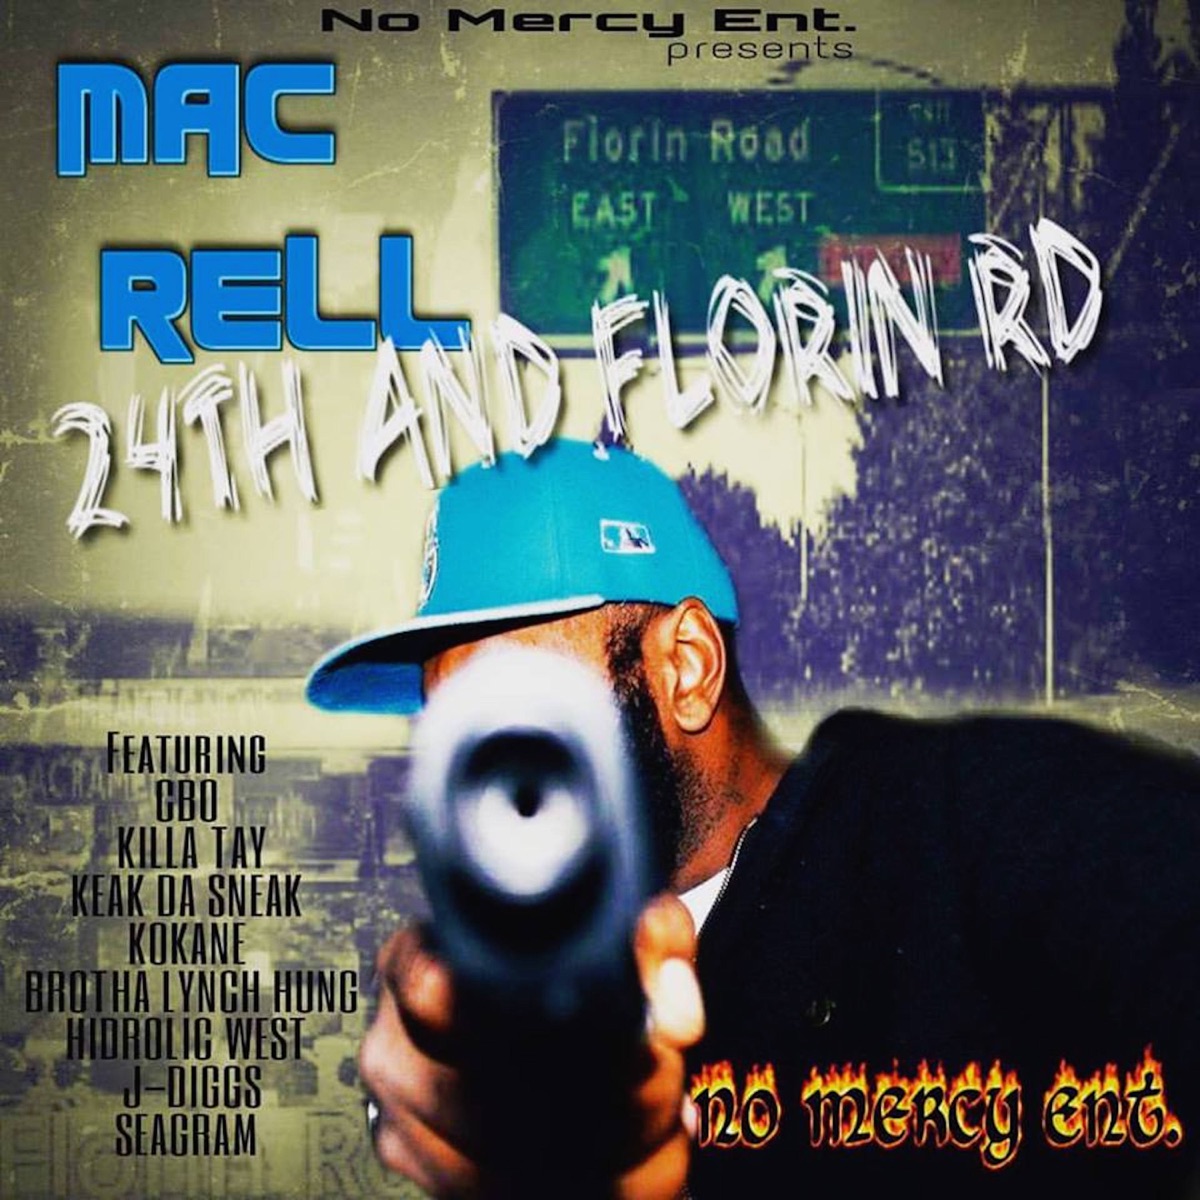 Mac Rell - No Mercy Ent. Presents: Mac Rell - 24th And Florin Rd